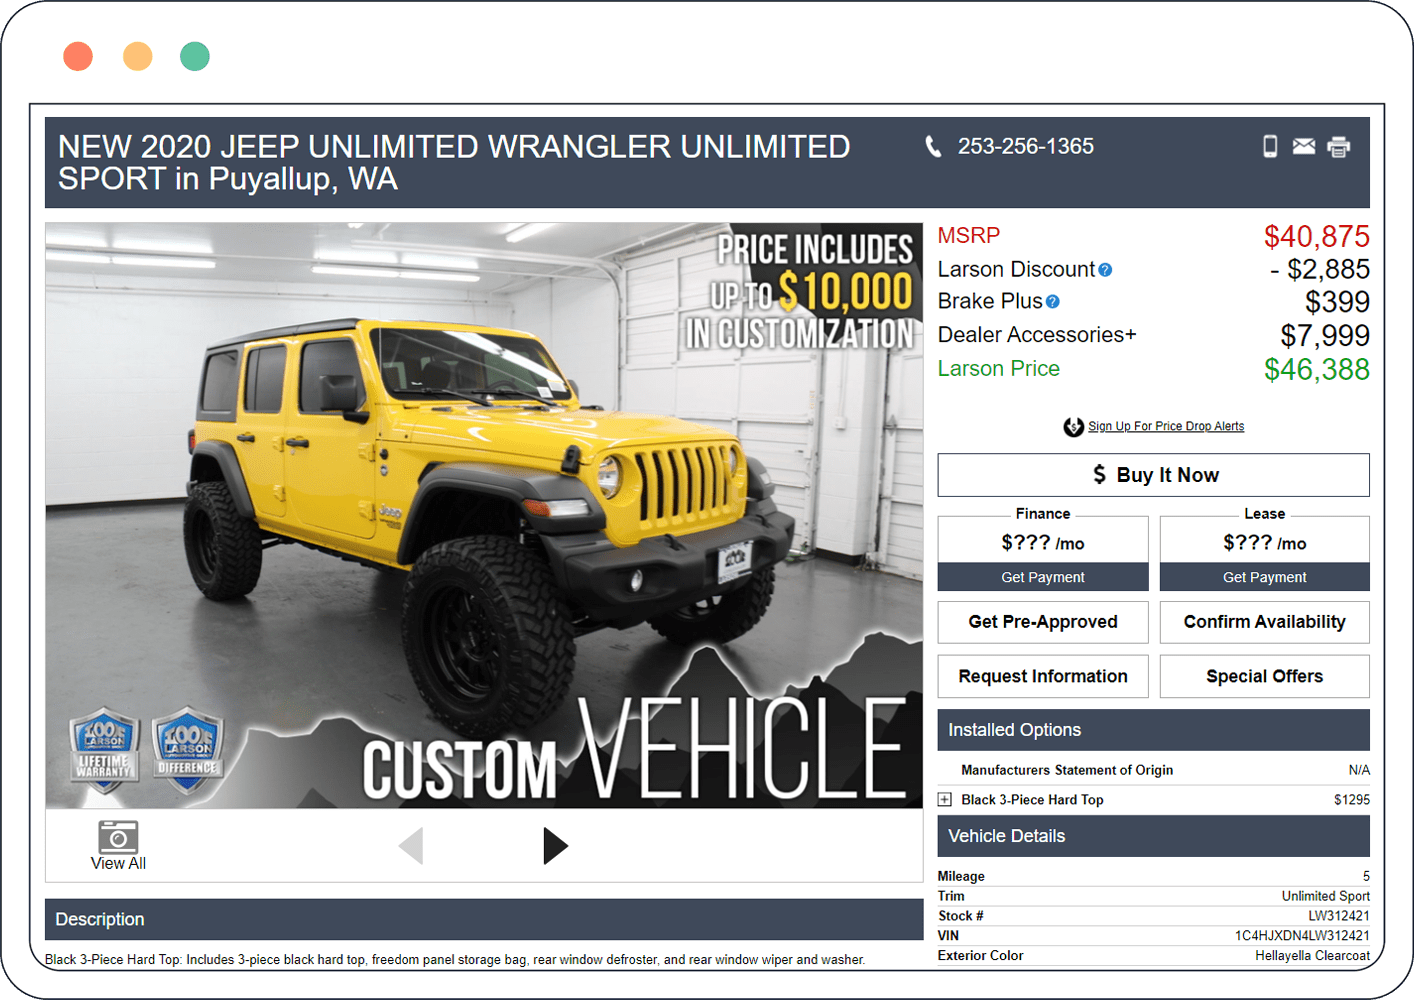 vehicle details page for yellow Jeep Wrangler